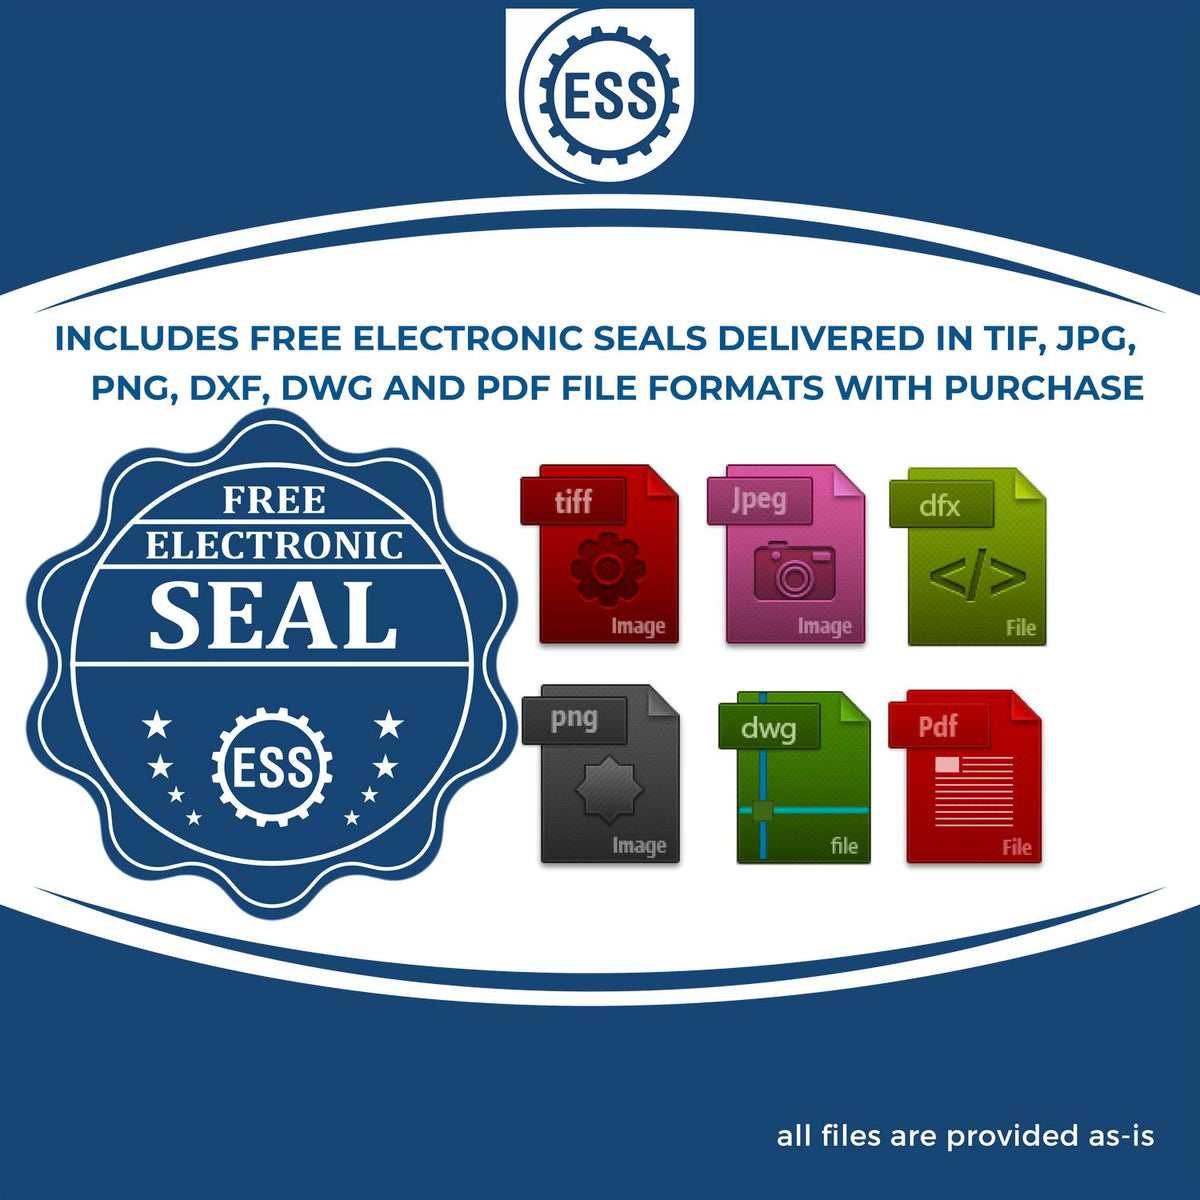 An infographic for the free electronic seal for the Hybrid Nevada Engineer Seal illustrating the different file type icons such as DXF, DWG, TIF, JPG and PNG.